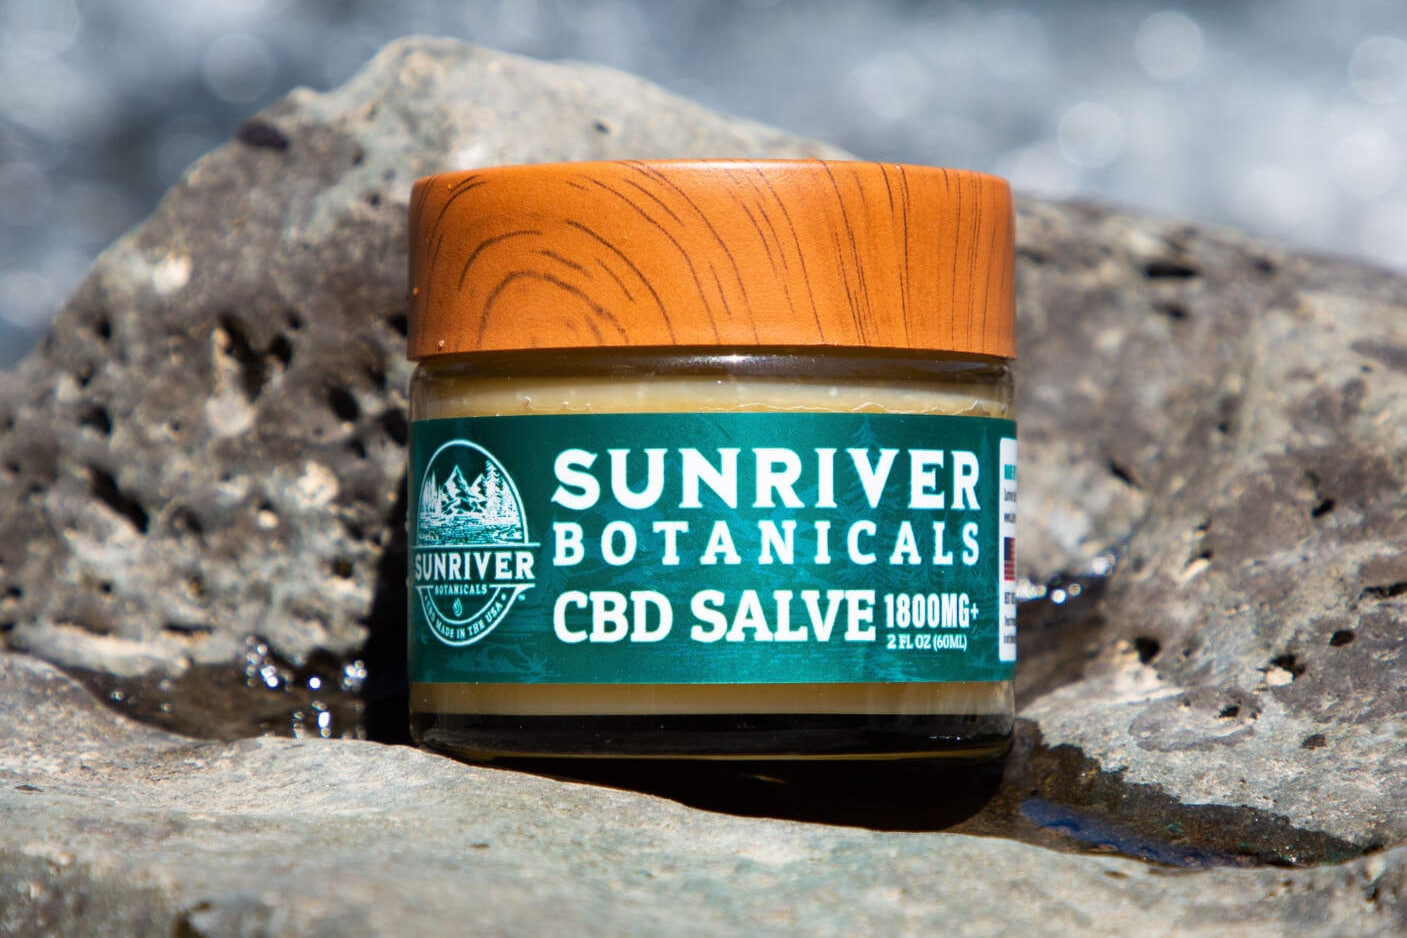 Salve is great for someone looking for CBD for Muscle pain